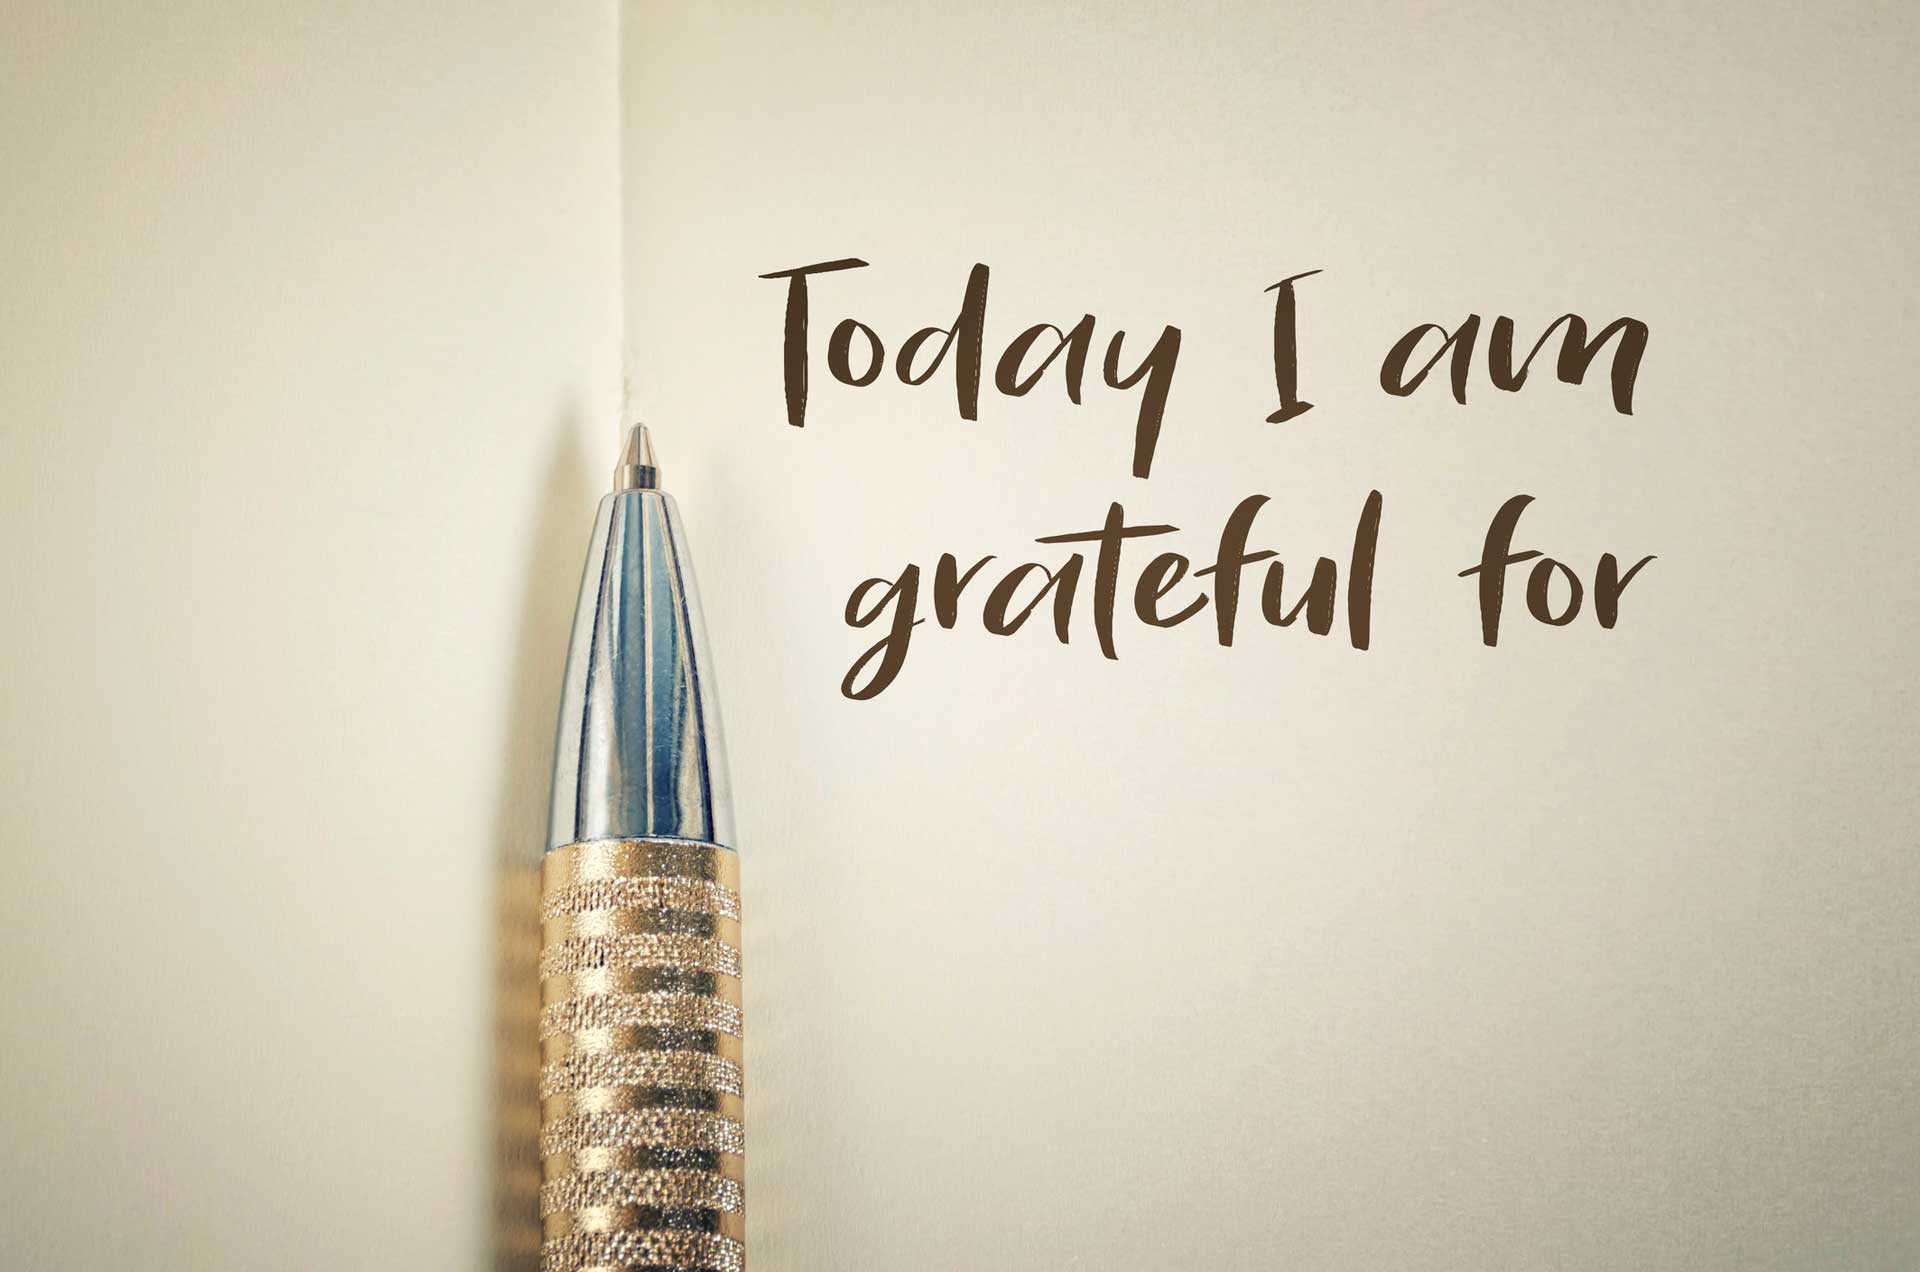 The Positive Effects of Gratitude